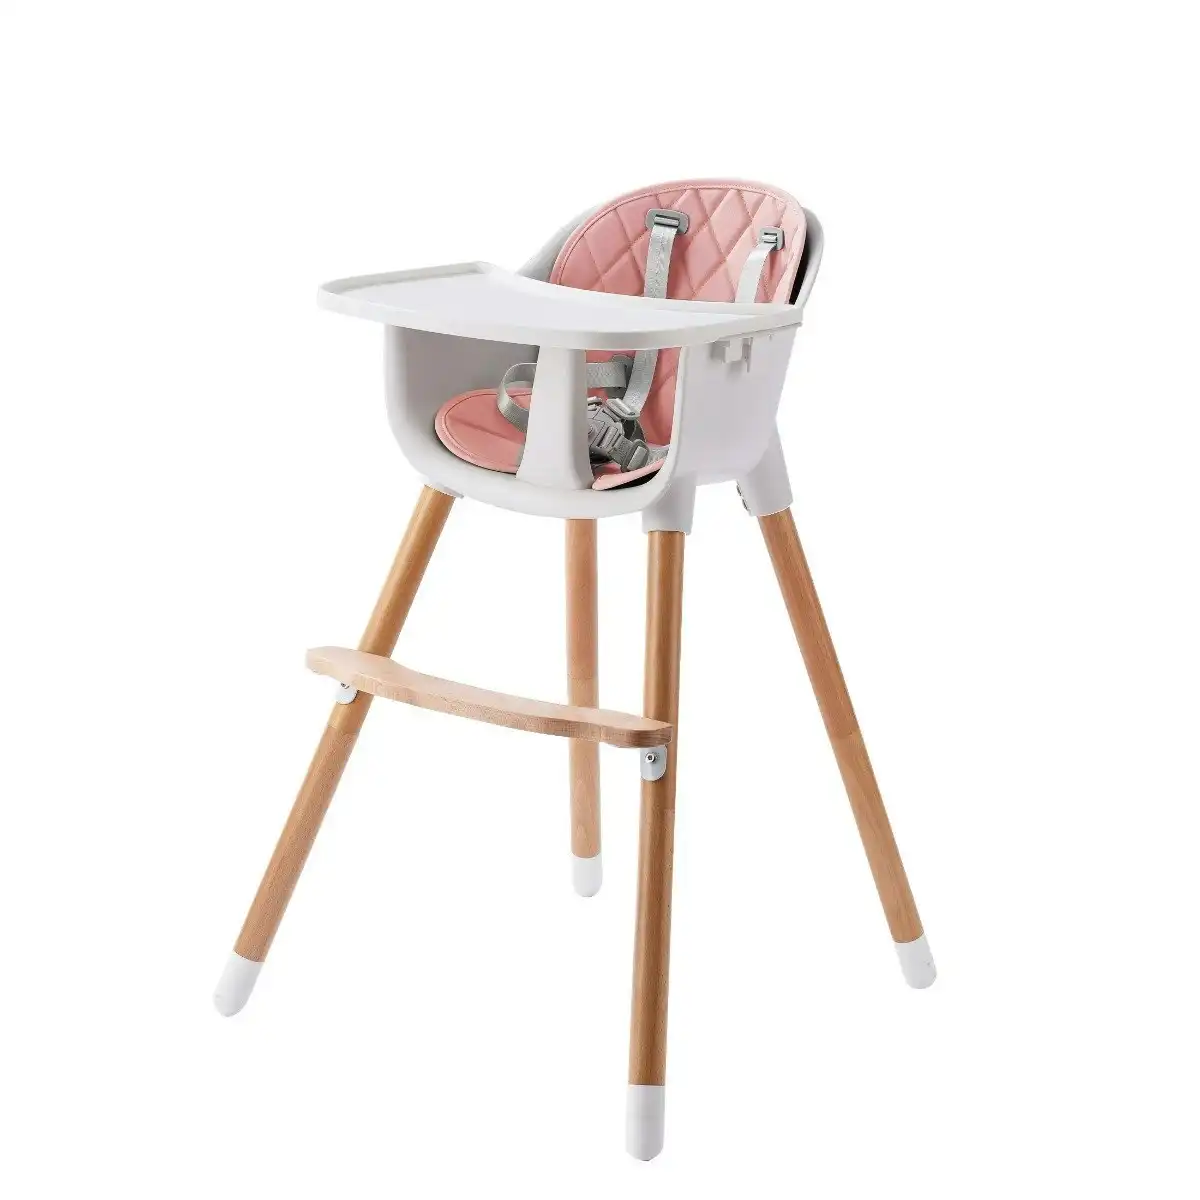 JOY  BABY Amelia 2-in-1 Timber Highchair - Pink